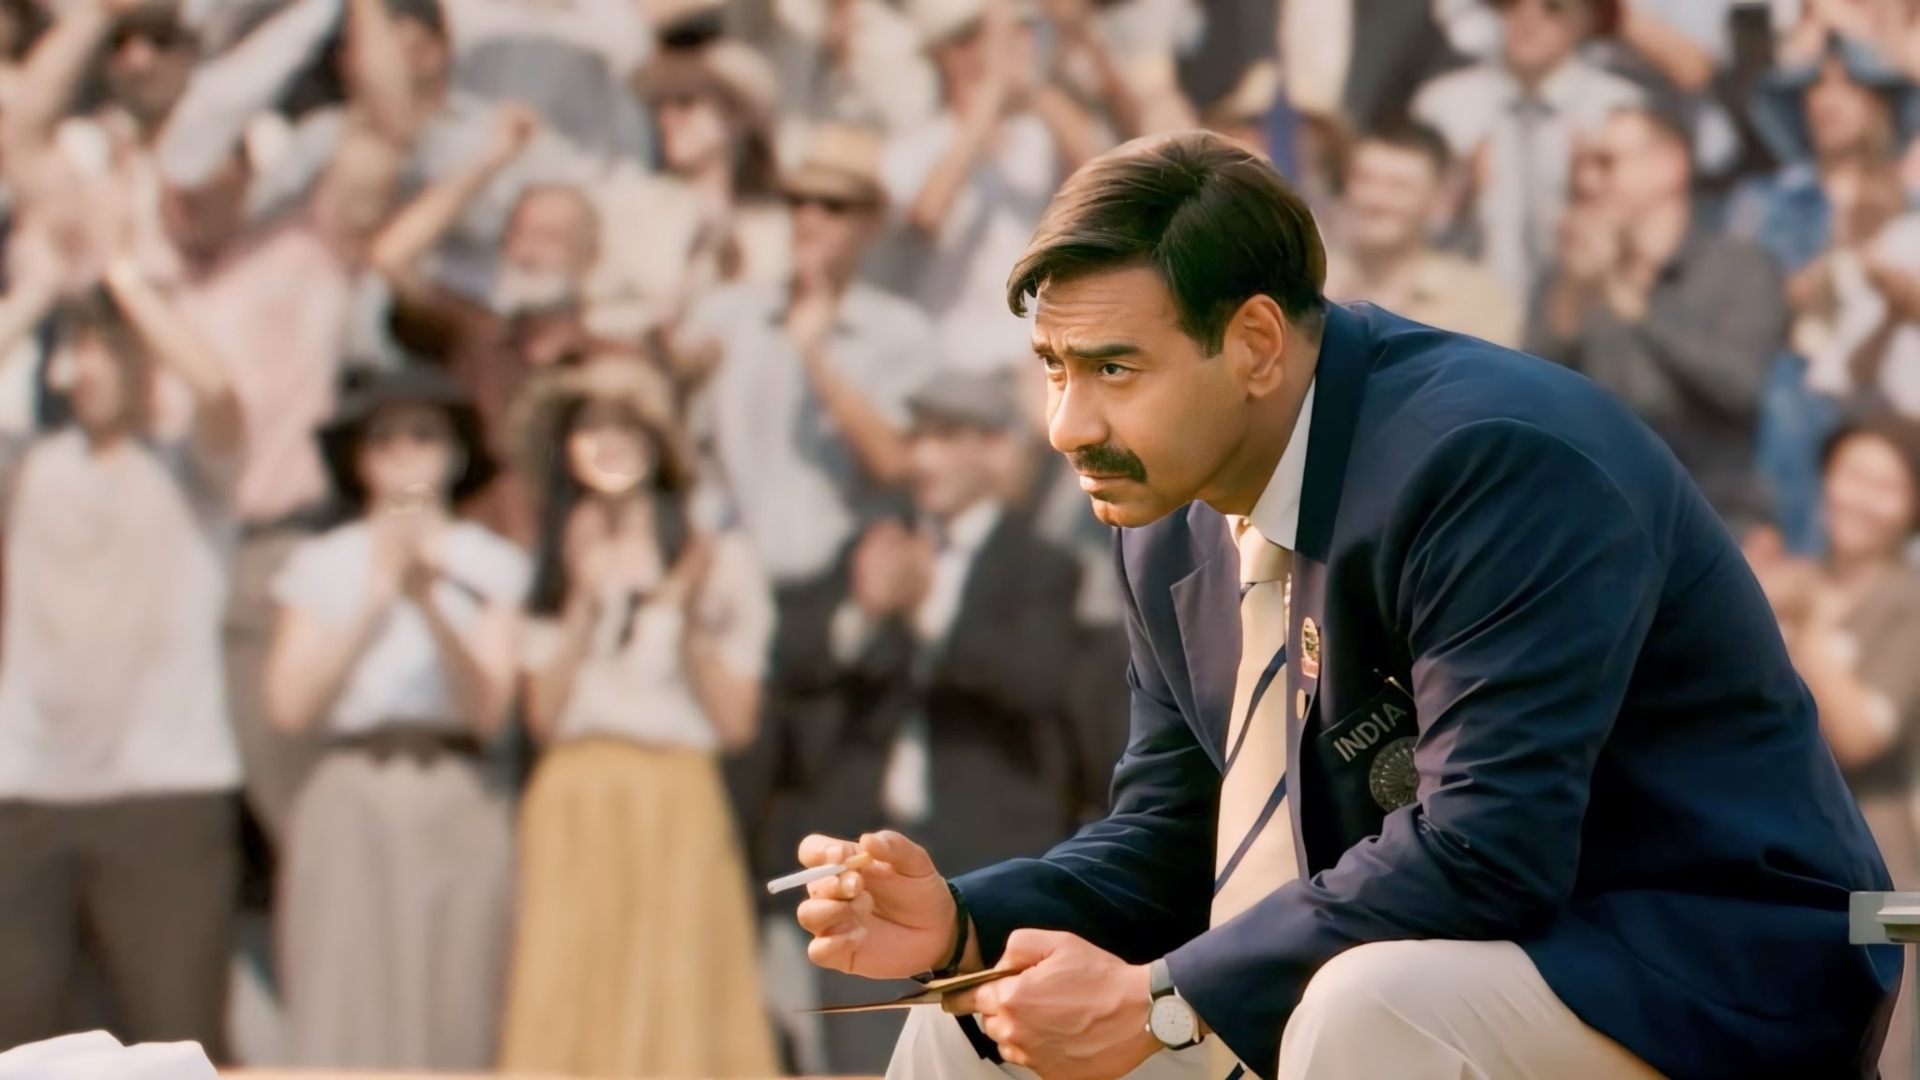 Why Did Ajay Devgn’s ‘Maidaan’ Fail at the Box Office Despite Positive Reviews? | Exclusive